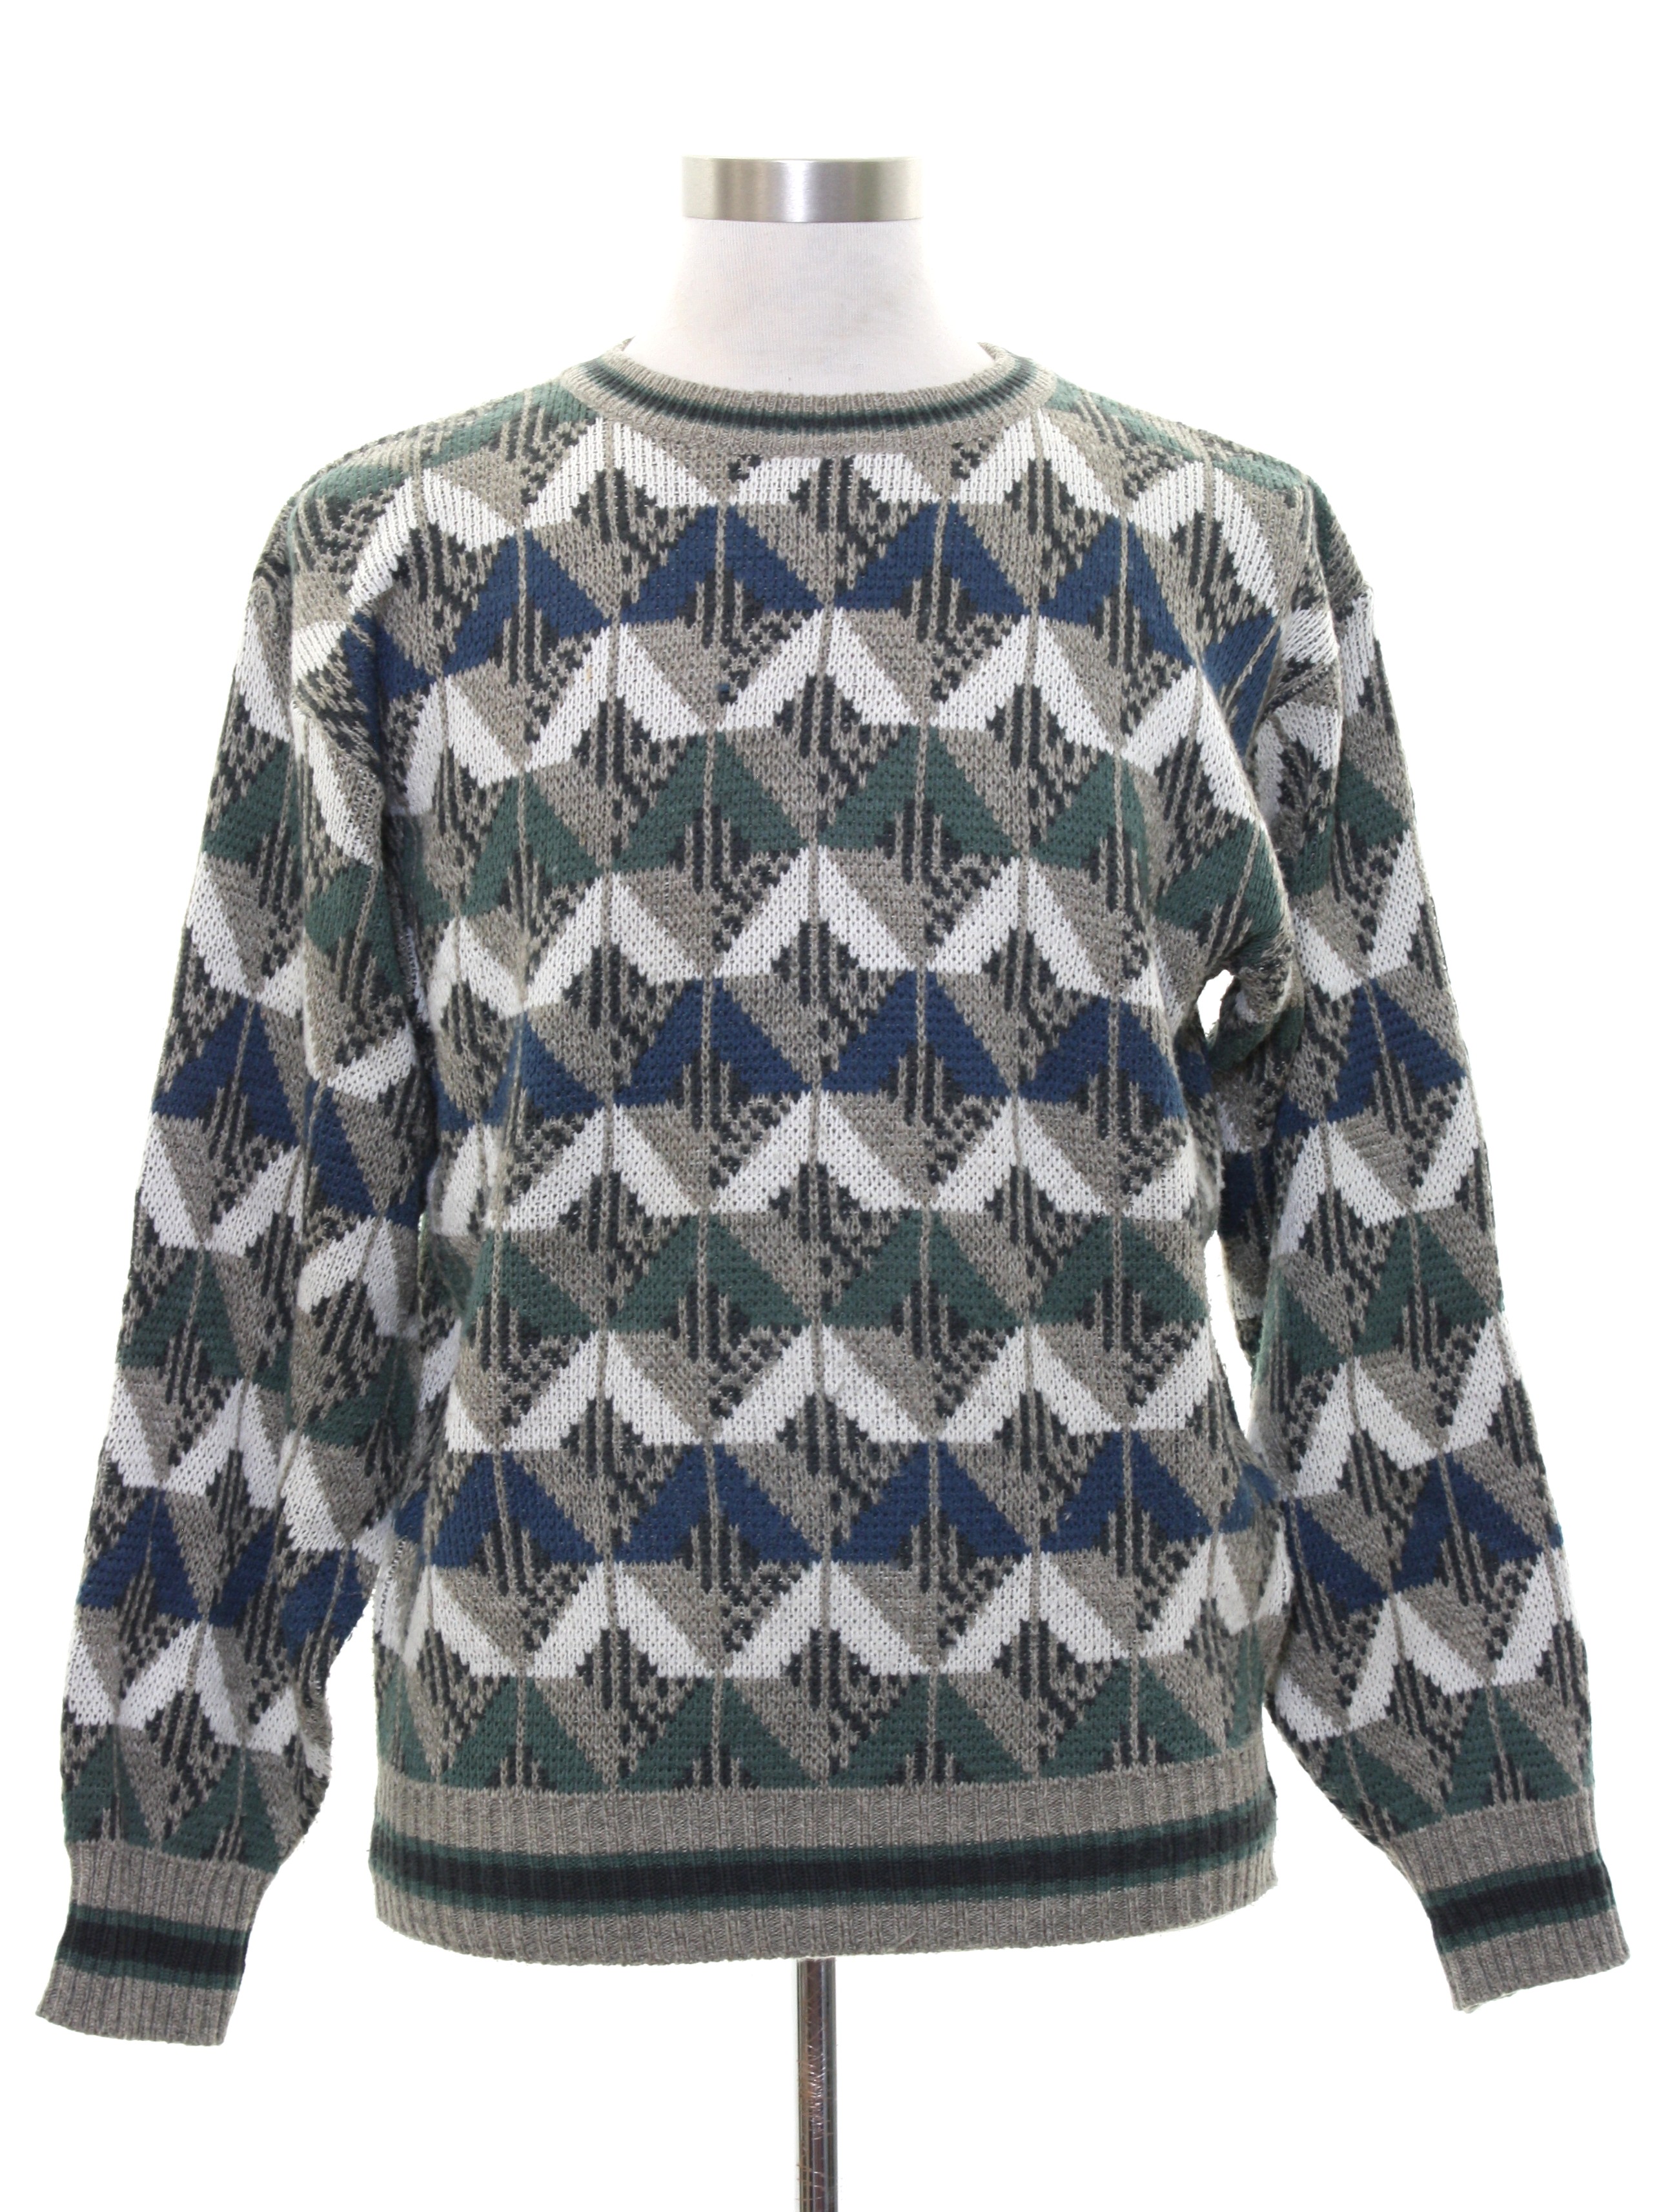 Retro 1980's Sweater (Towncraft) : 80s -Towncraft- Mens hazy taupe ...